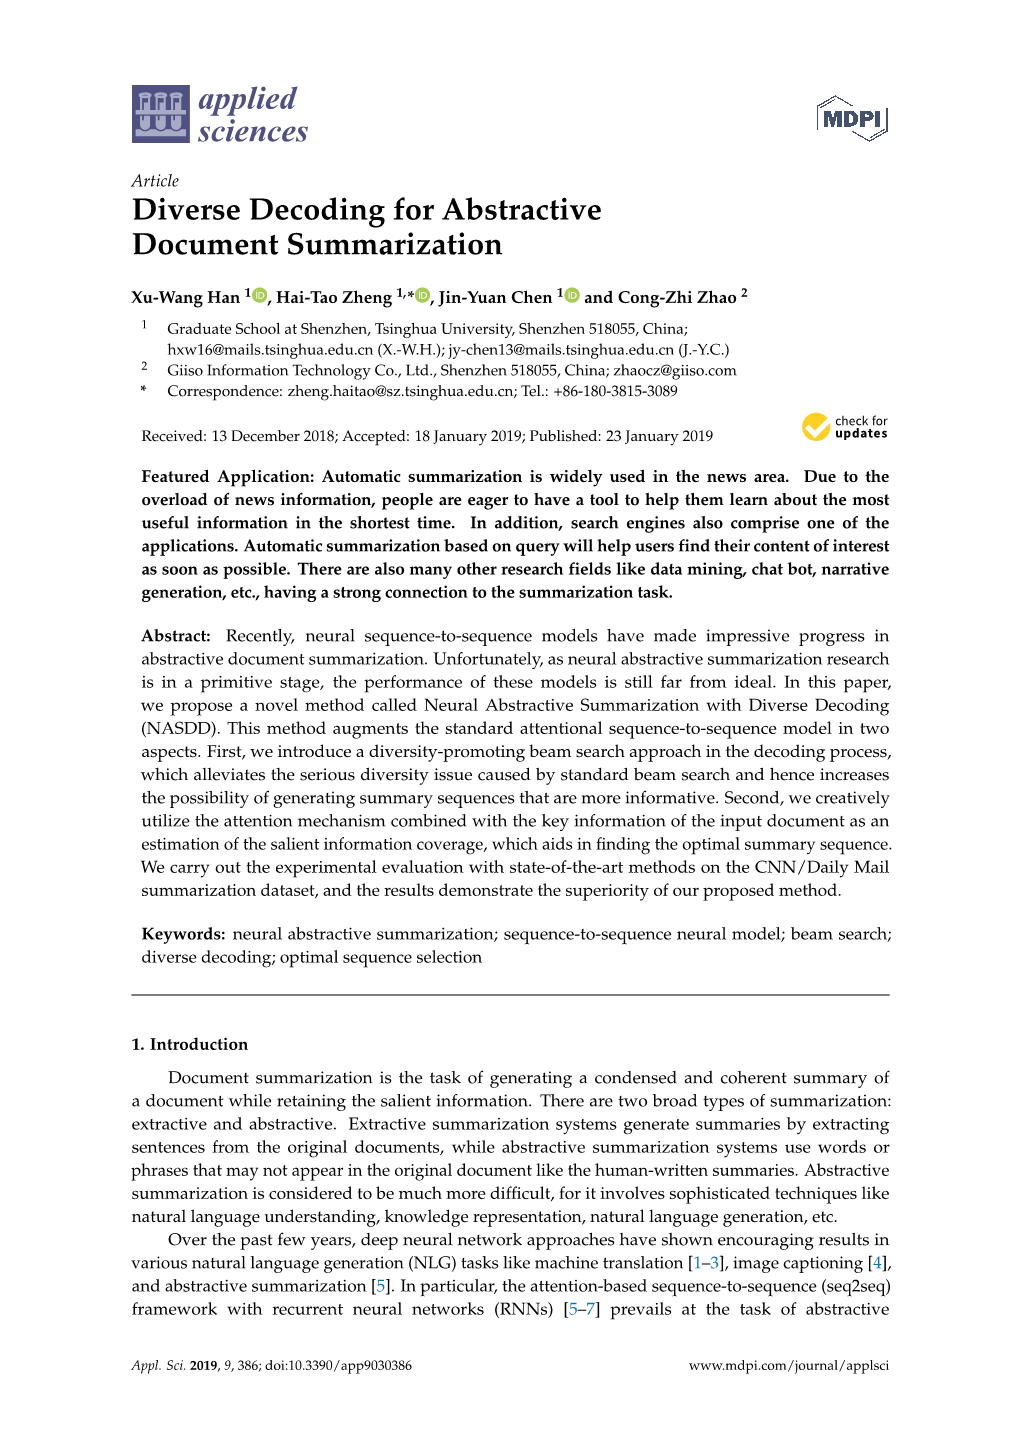 Diverse Decoding for Abstractive Document Summarization